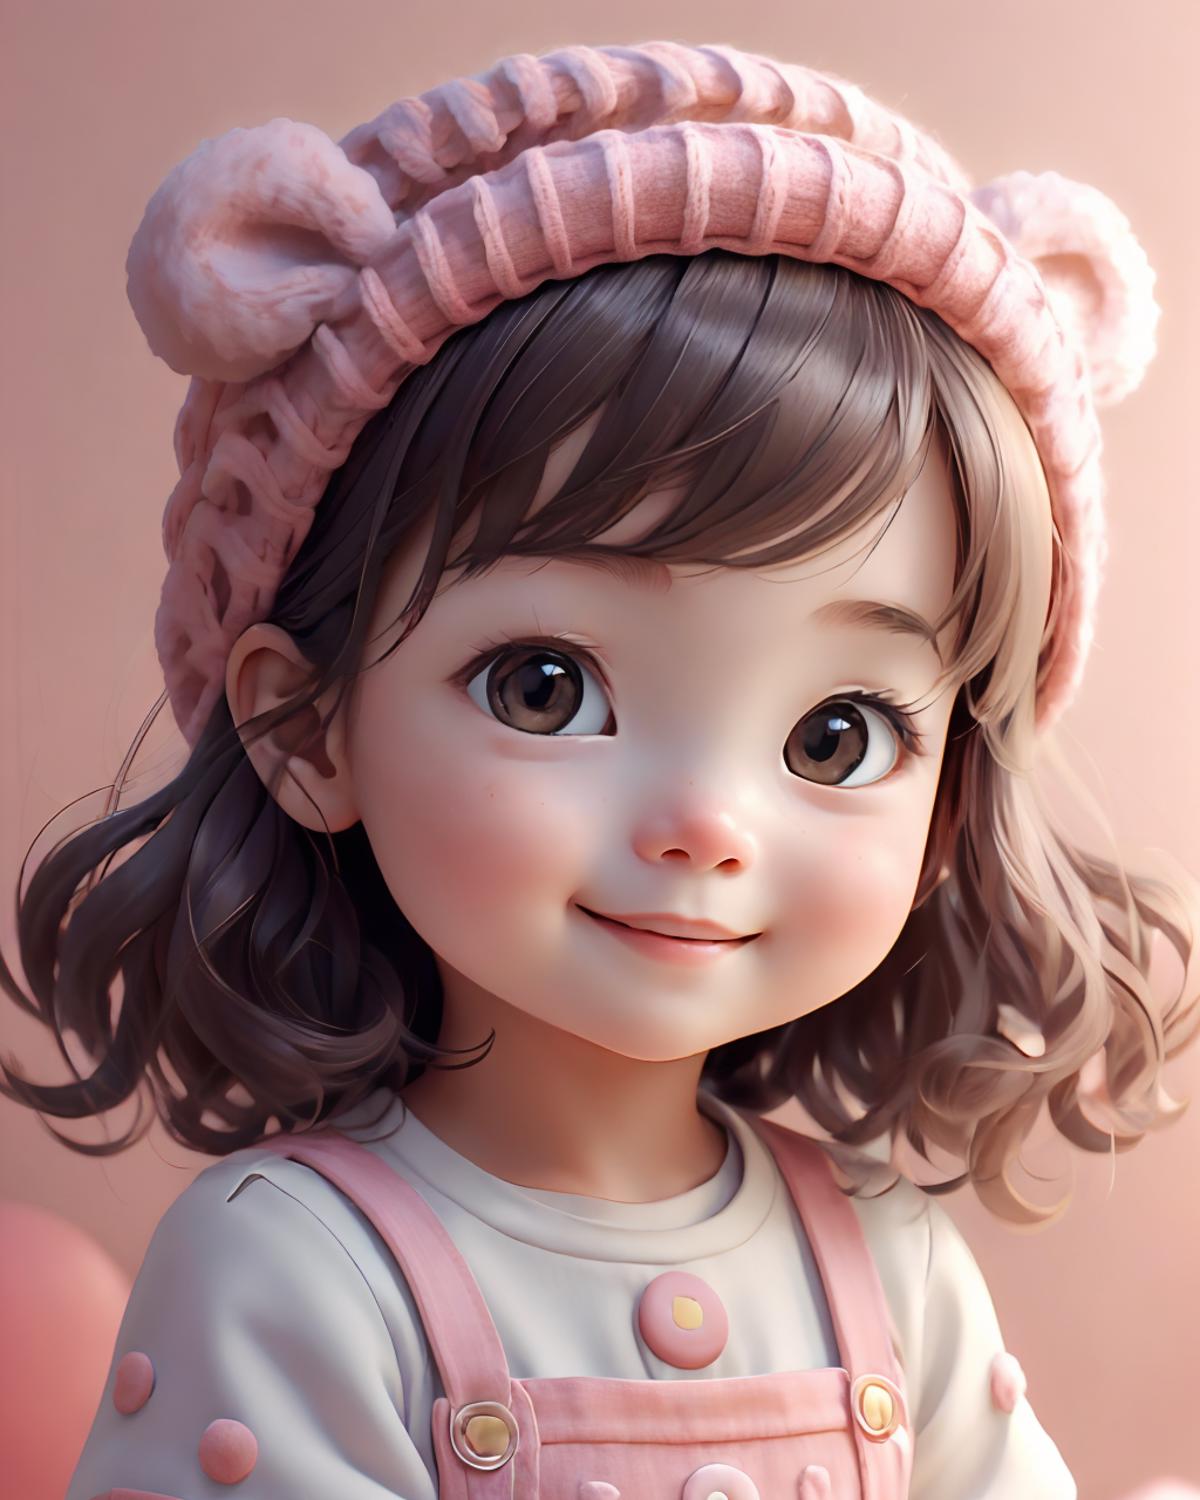 A young girl wearing a pink hat with a bow and pink clothing with a smile on her face.